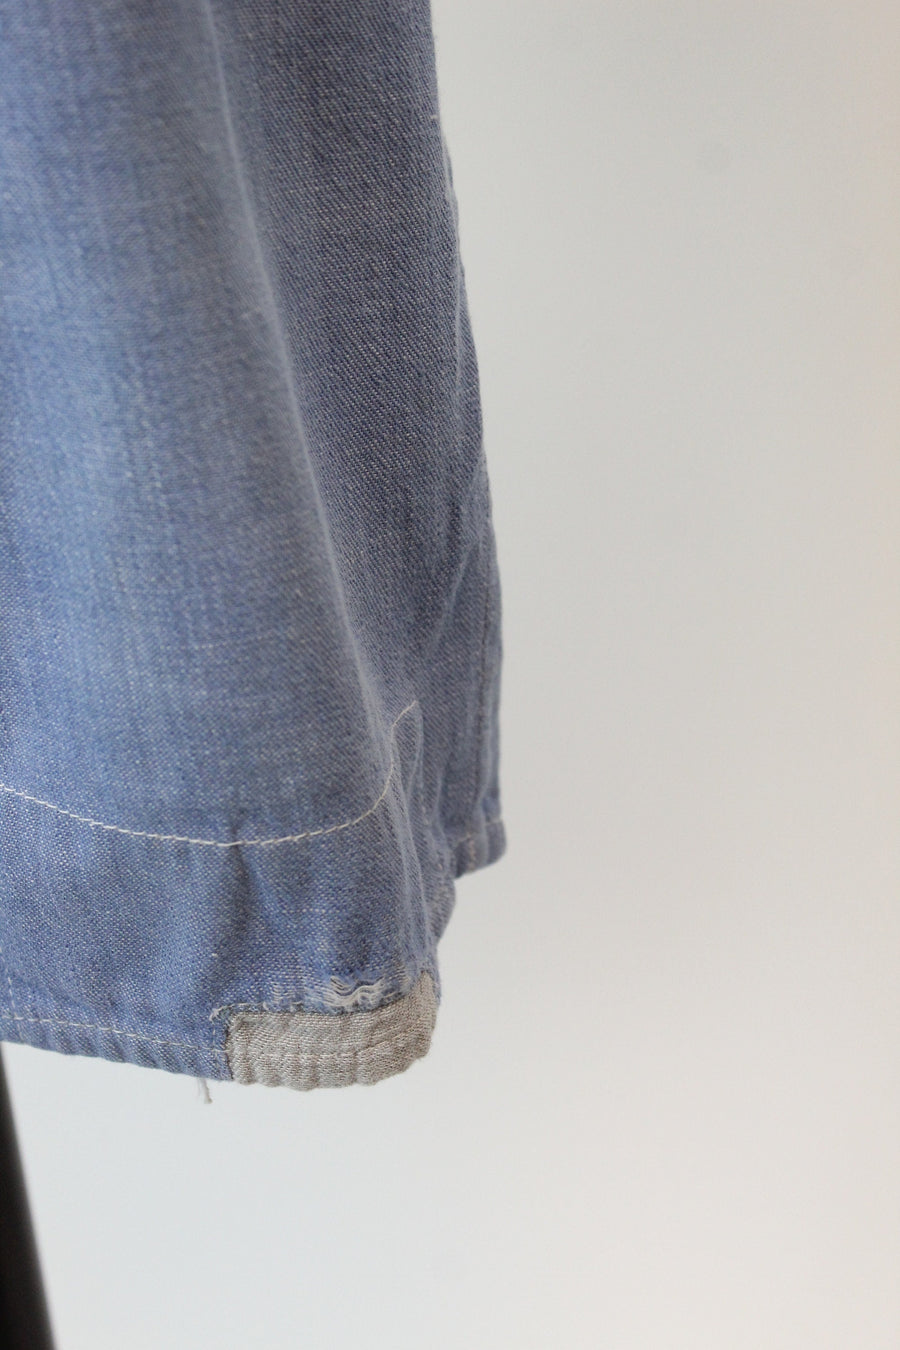 1950s DENIM workwear cropped pants small | new spring summer